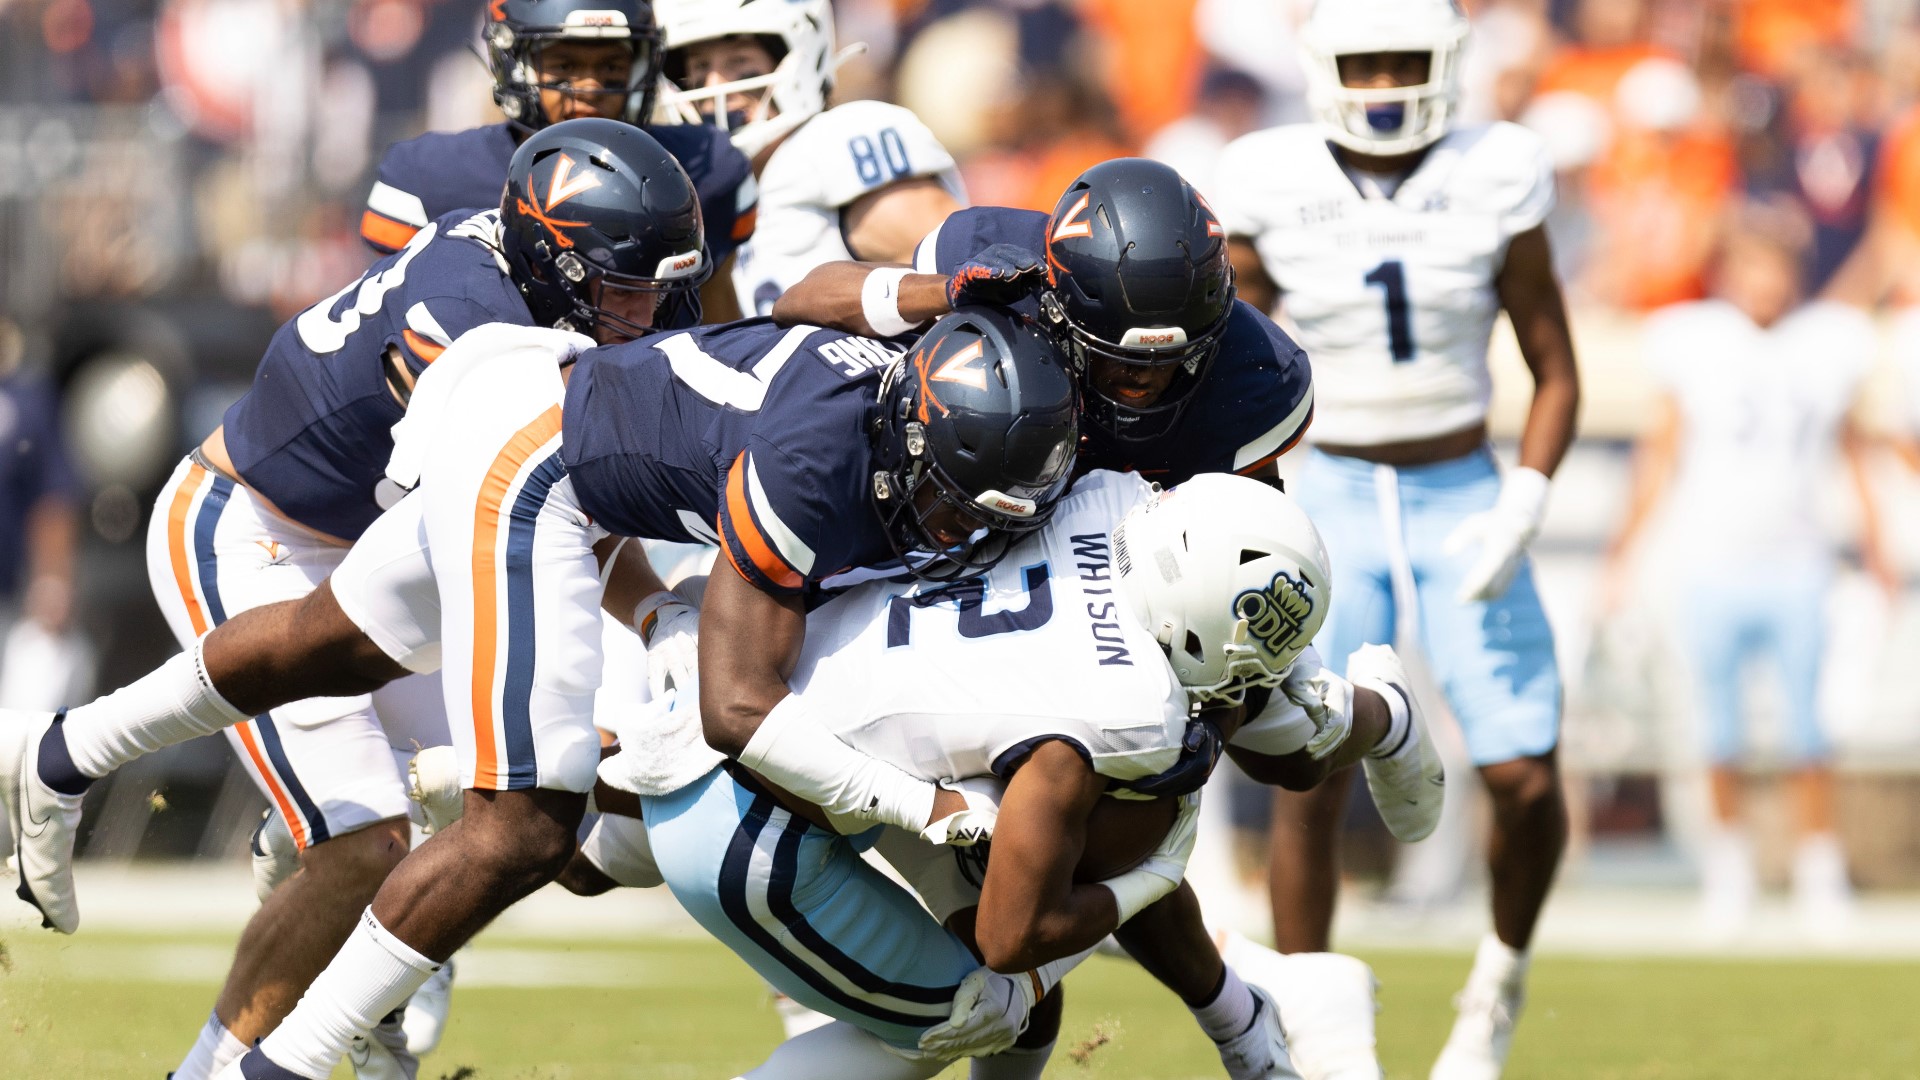 The Cavaliers outgained Old Dominion 513-324, but twice fumbled the ball away inside the Monarchs' 5 yard-line, and another time to set up ODU's first points.